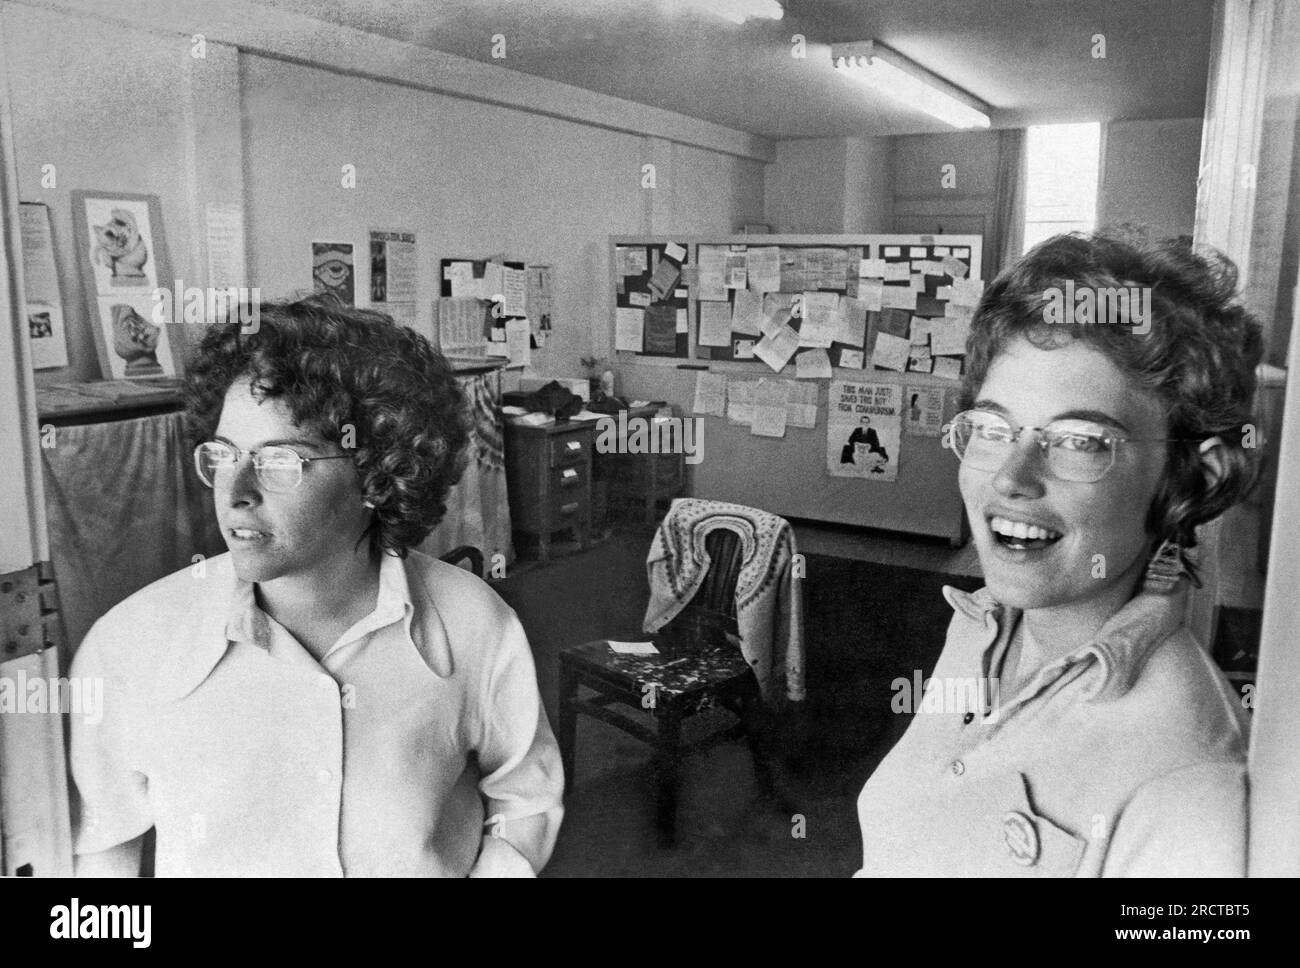 San Francisco, California:  August 4, 1972 Two of the founding members of the San Francisco Women's Health Collective on 24st Street in SF. Stock Photo